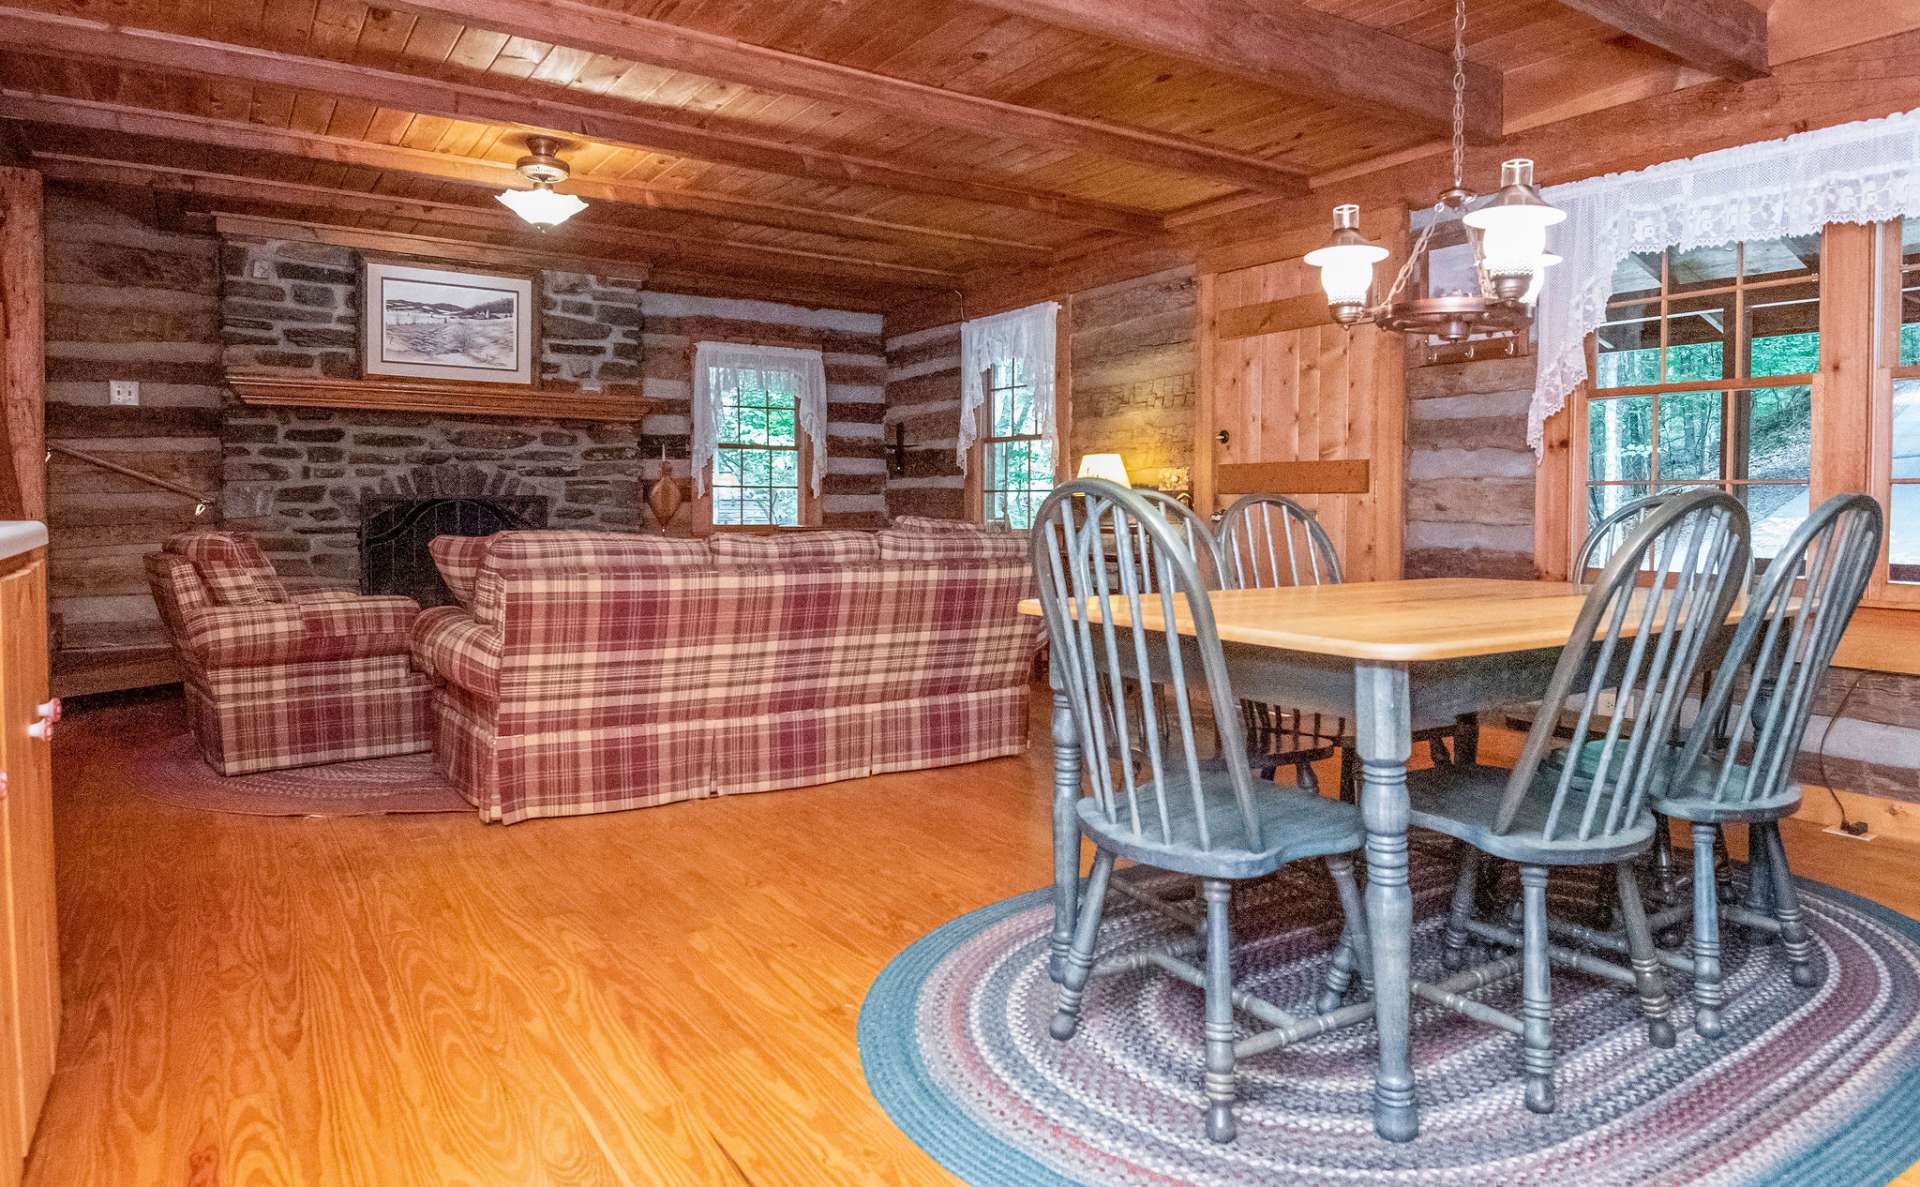 Pine beamed ceilings and wood flooring add to the country charm.